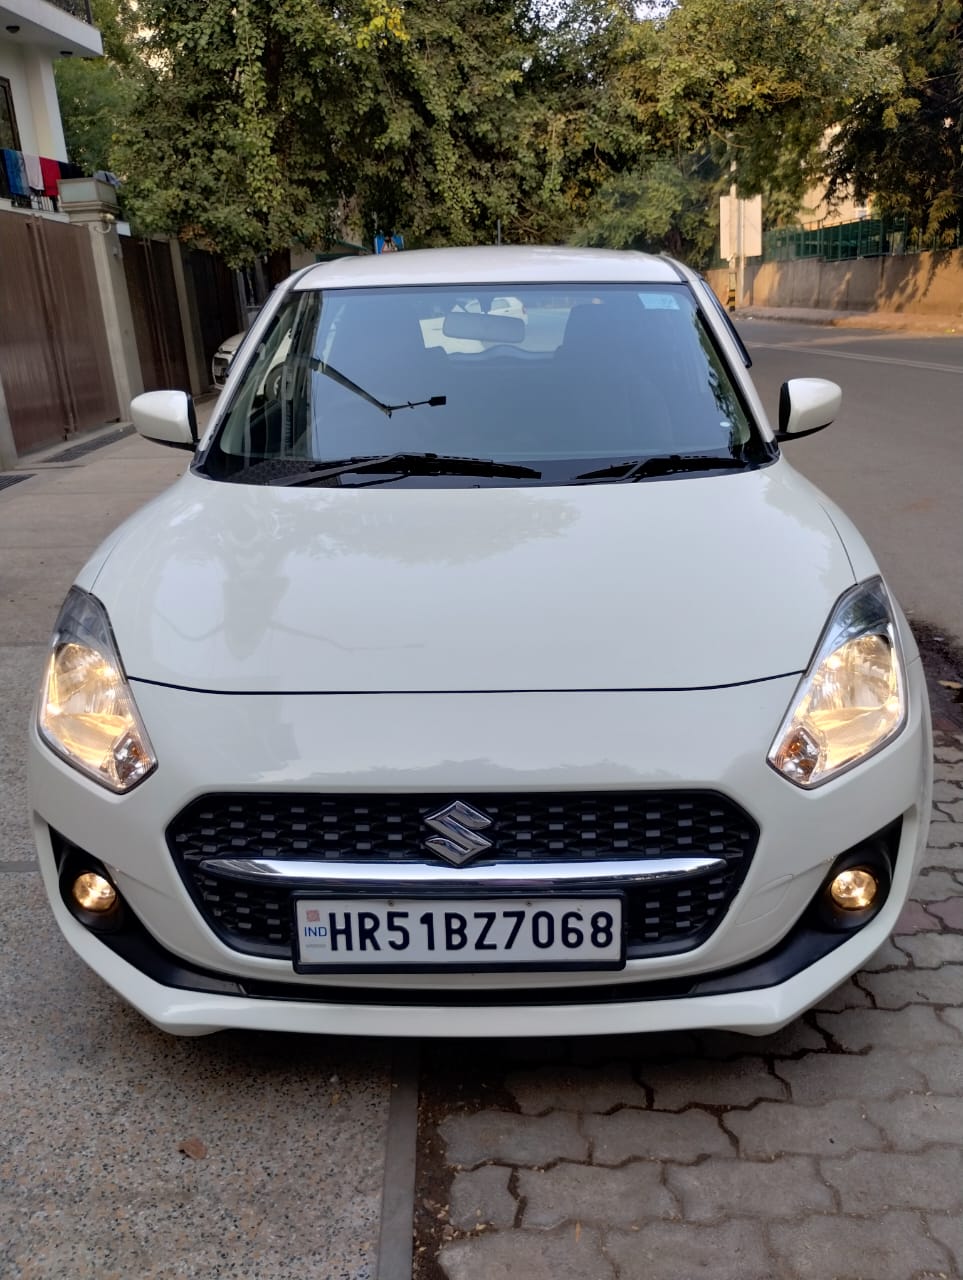 For sale Maruti Swift lxi optional Modal 2020 April First owner car Kms 48039 With company service record Insurance till 2024 ALLOY wheels New tyers 2nd key available All original paint car Screchless car Jolly motors chittranjan park South delhi nehru place 9810012032